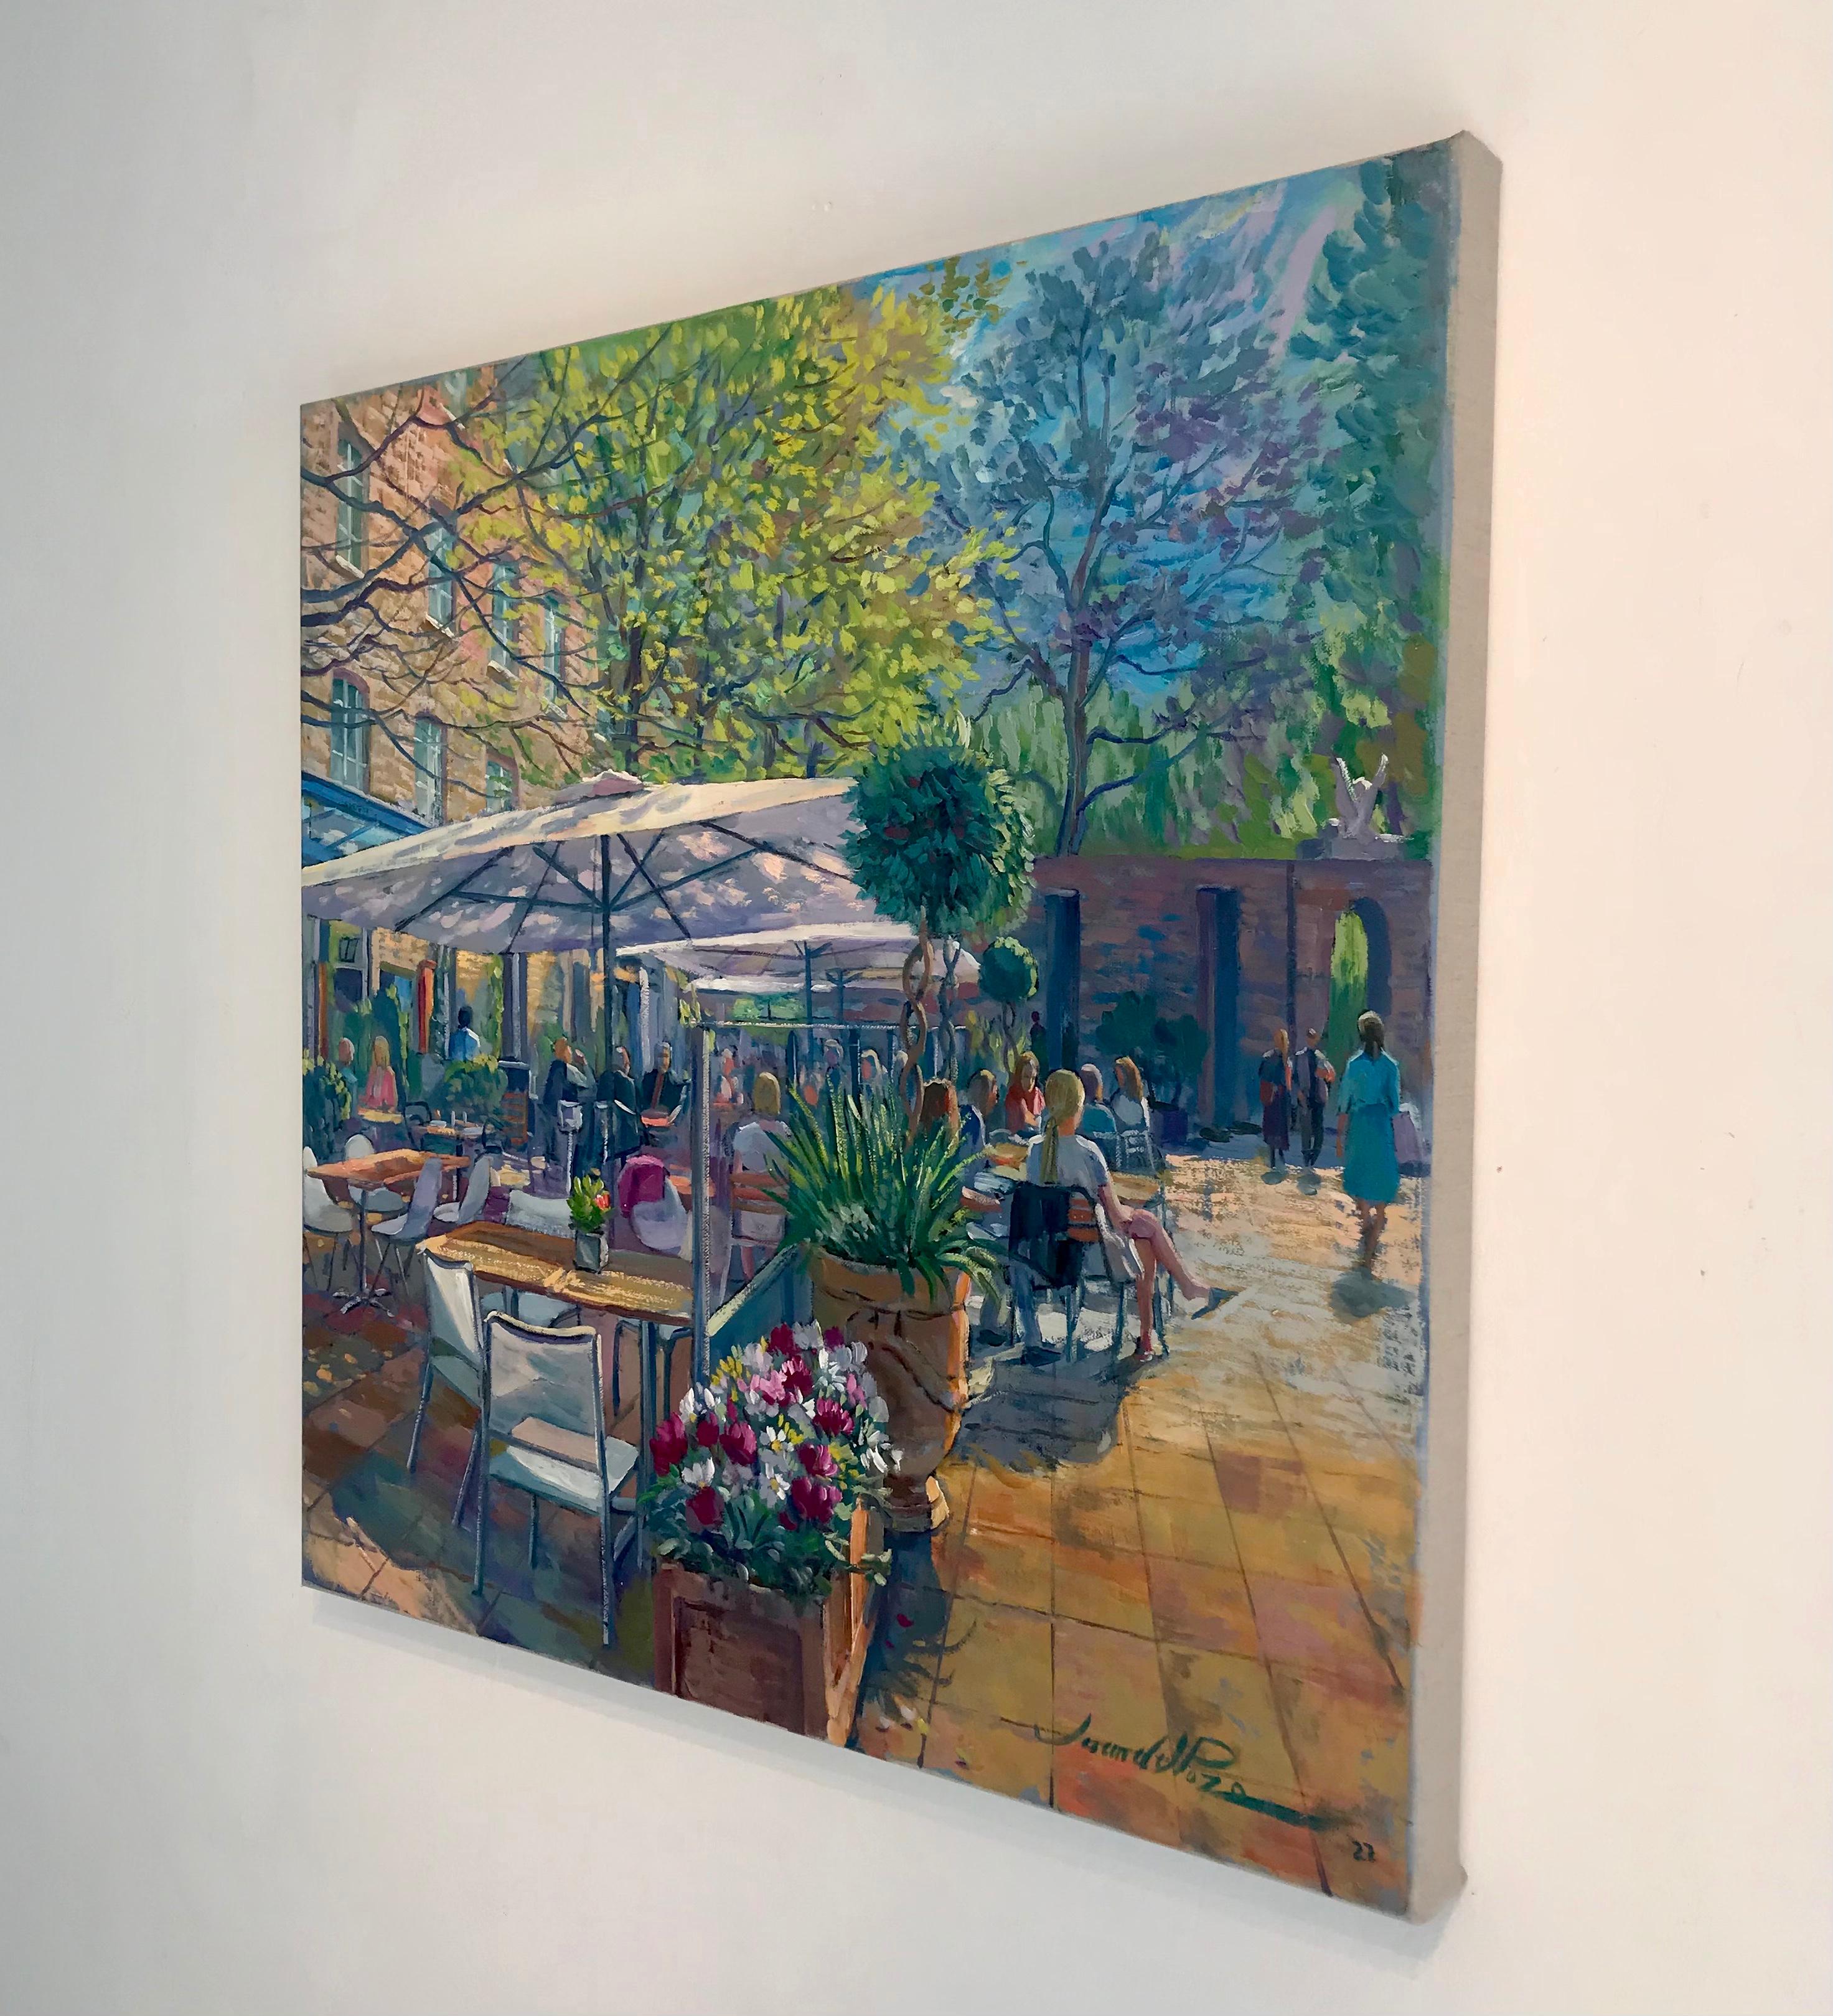 When the Sun is Shining-original impressionism figurative cityscape oil painting - Impressionist Painting by Juan del Pozo